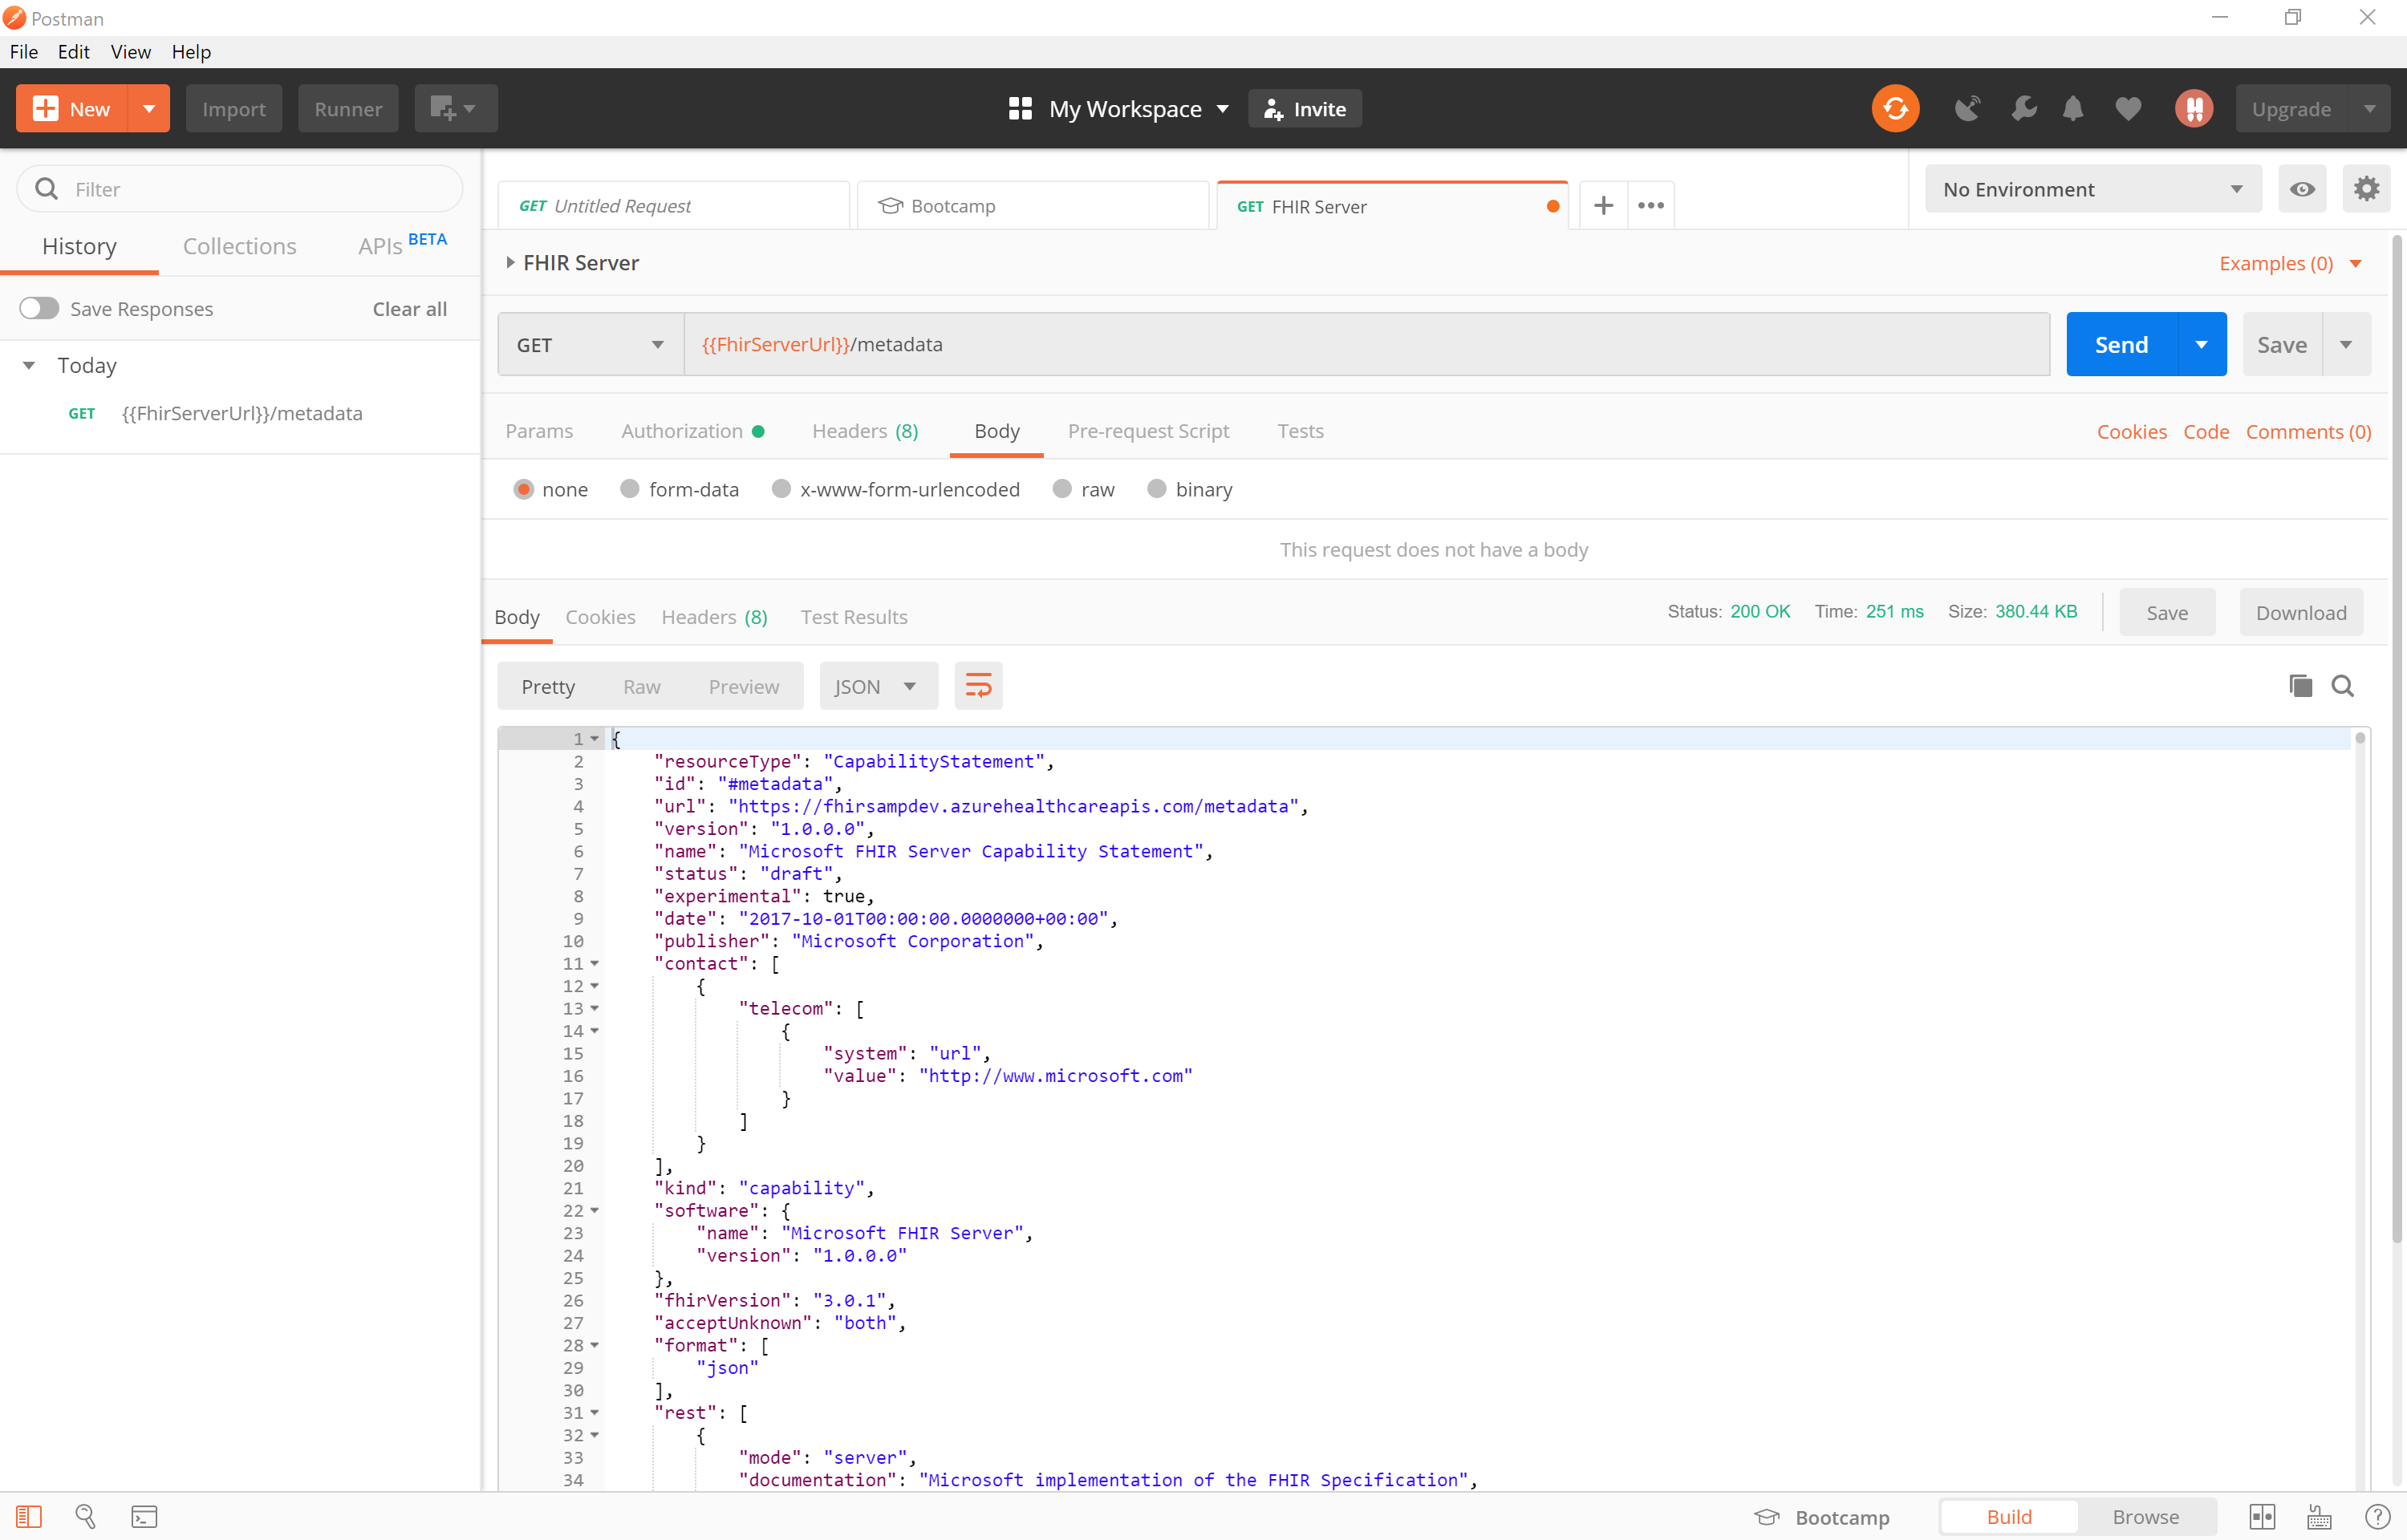 Check the capability statement from the /metadata endpoint in Postman